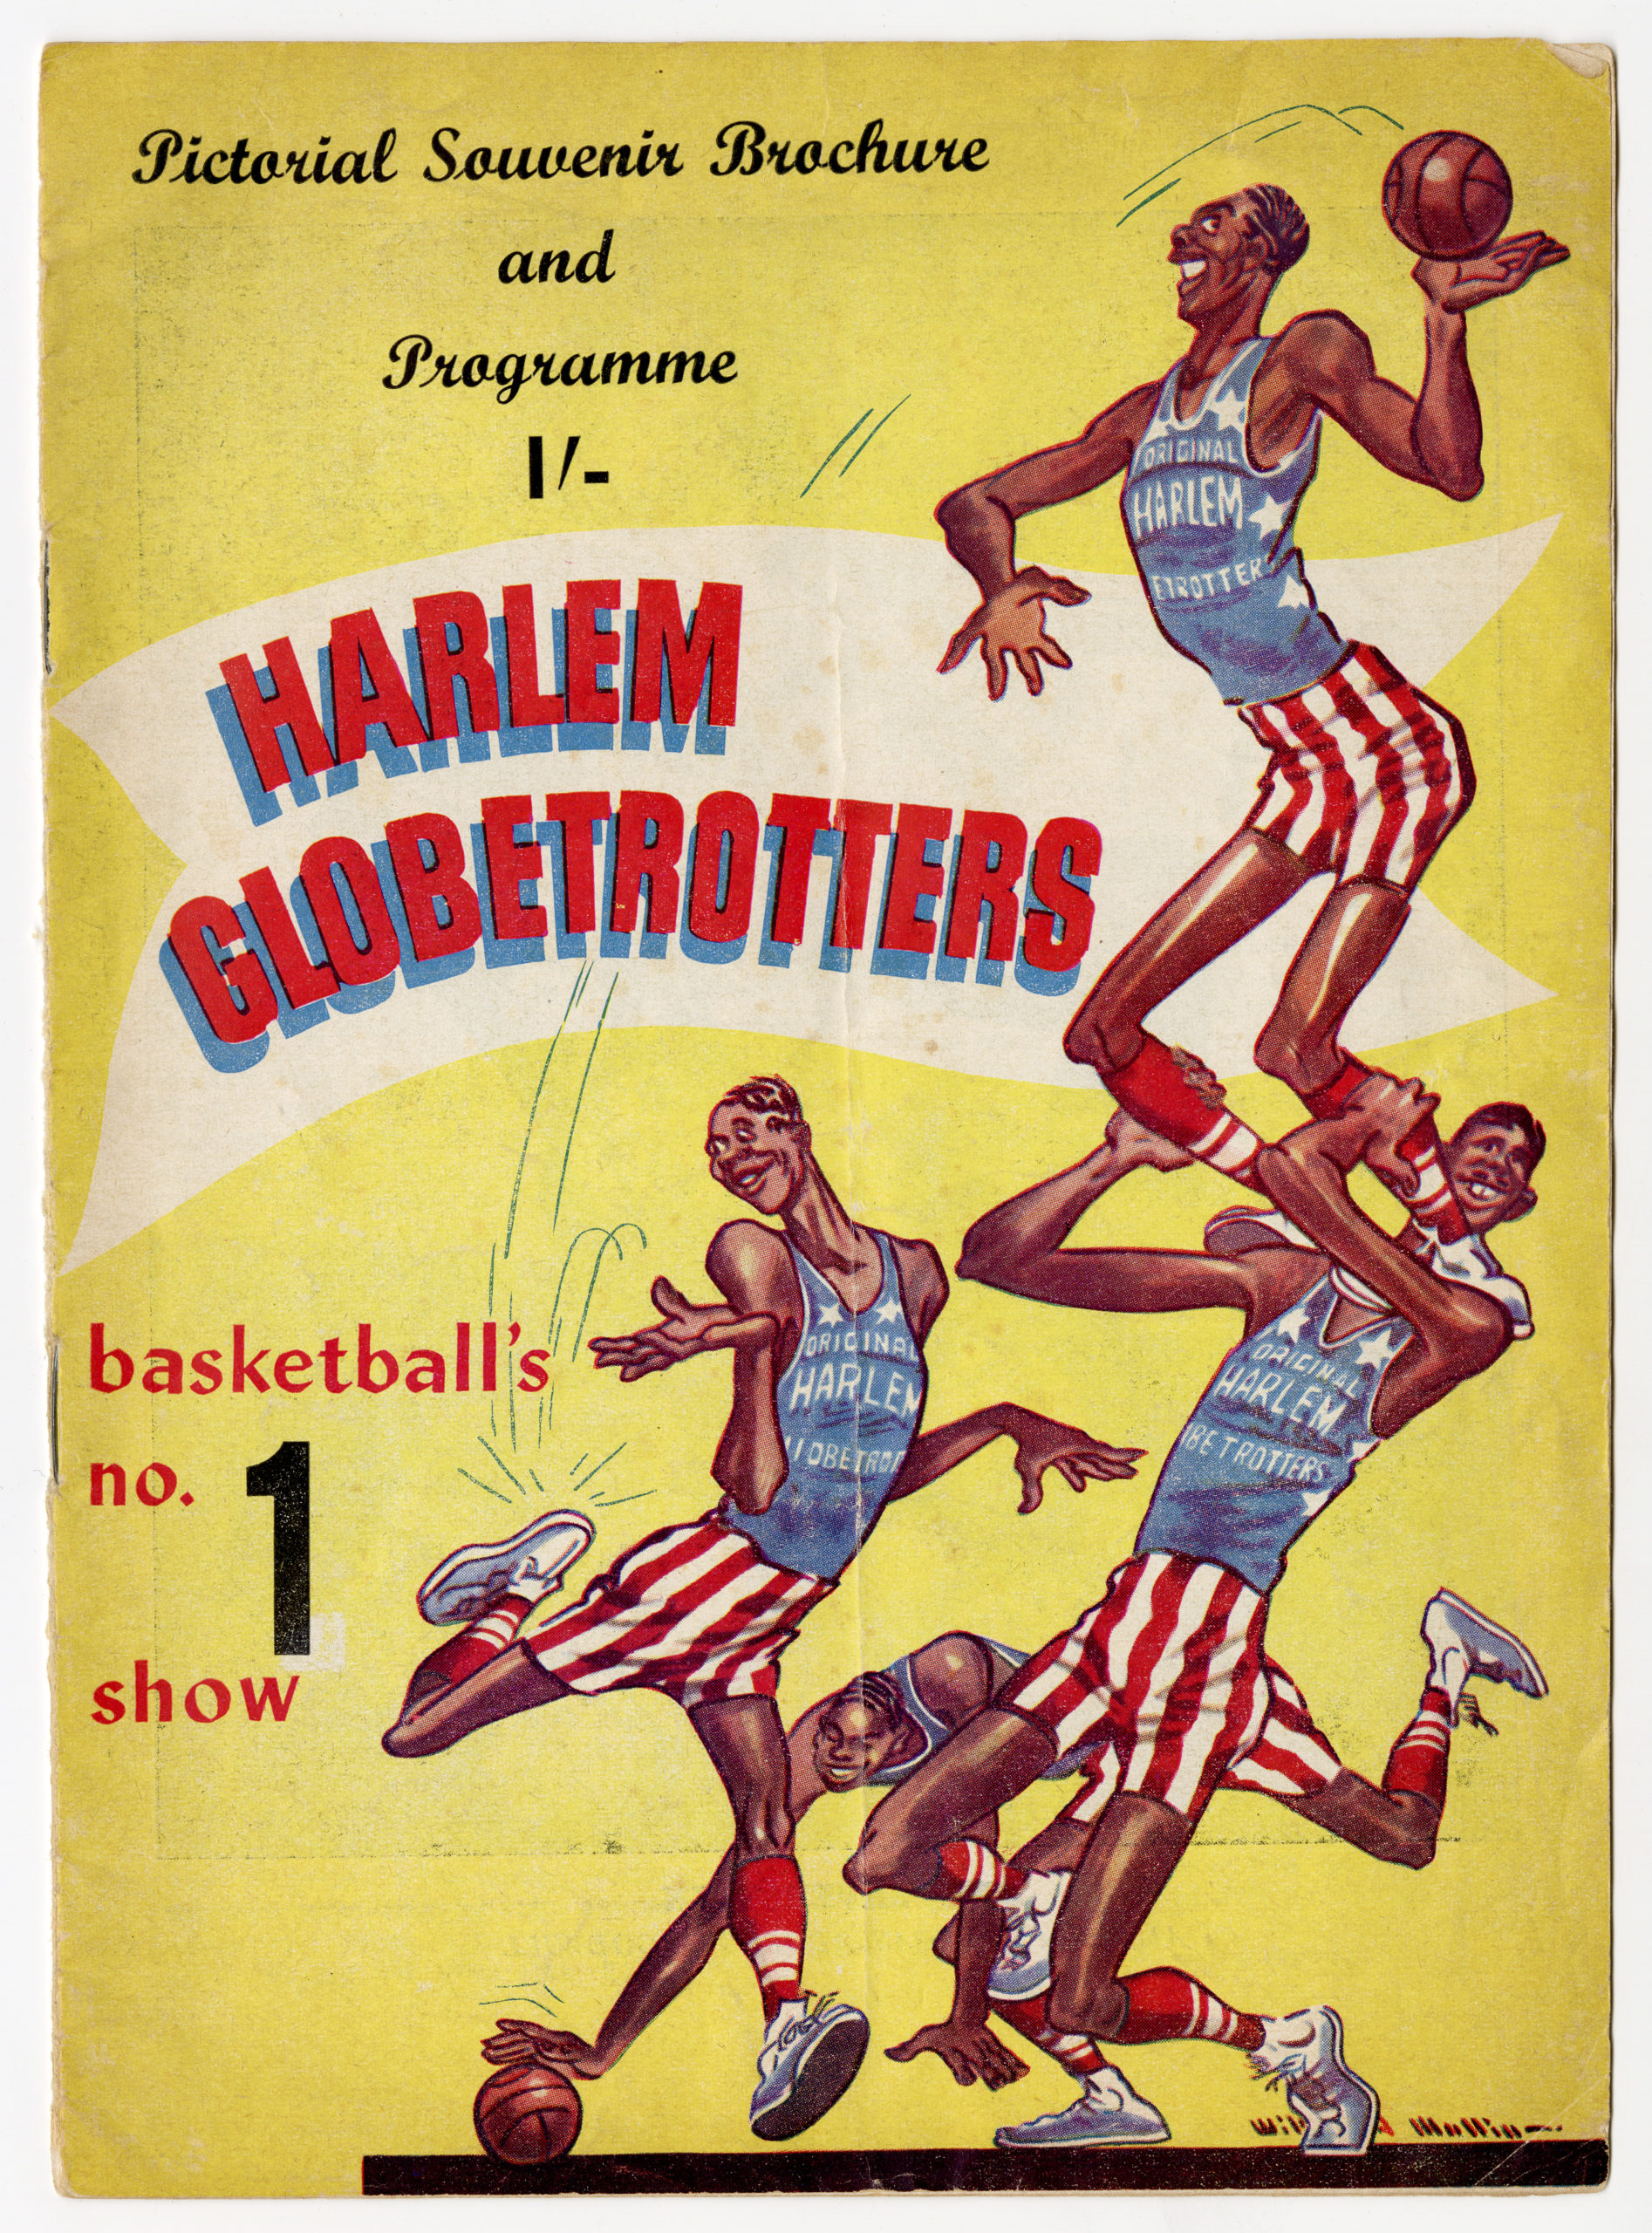 Harlem Globetrotters, Pictorial Souvenir Brochure and Programme, 1958. Courtesy of Roy Delbyck, Museum of Chinese in America (MOCA) Collections.